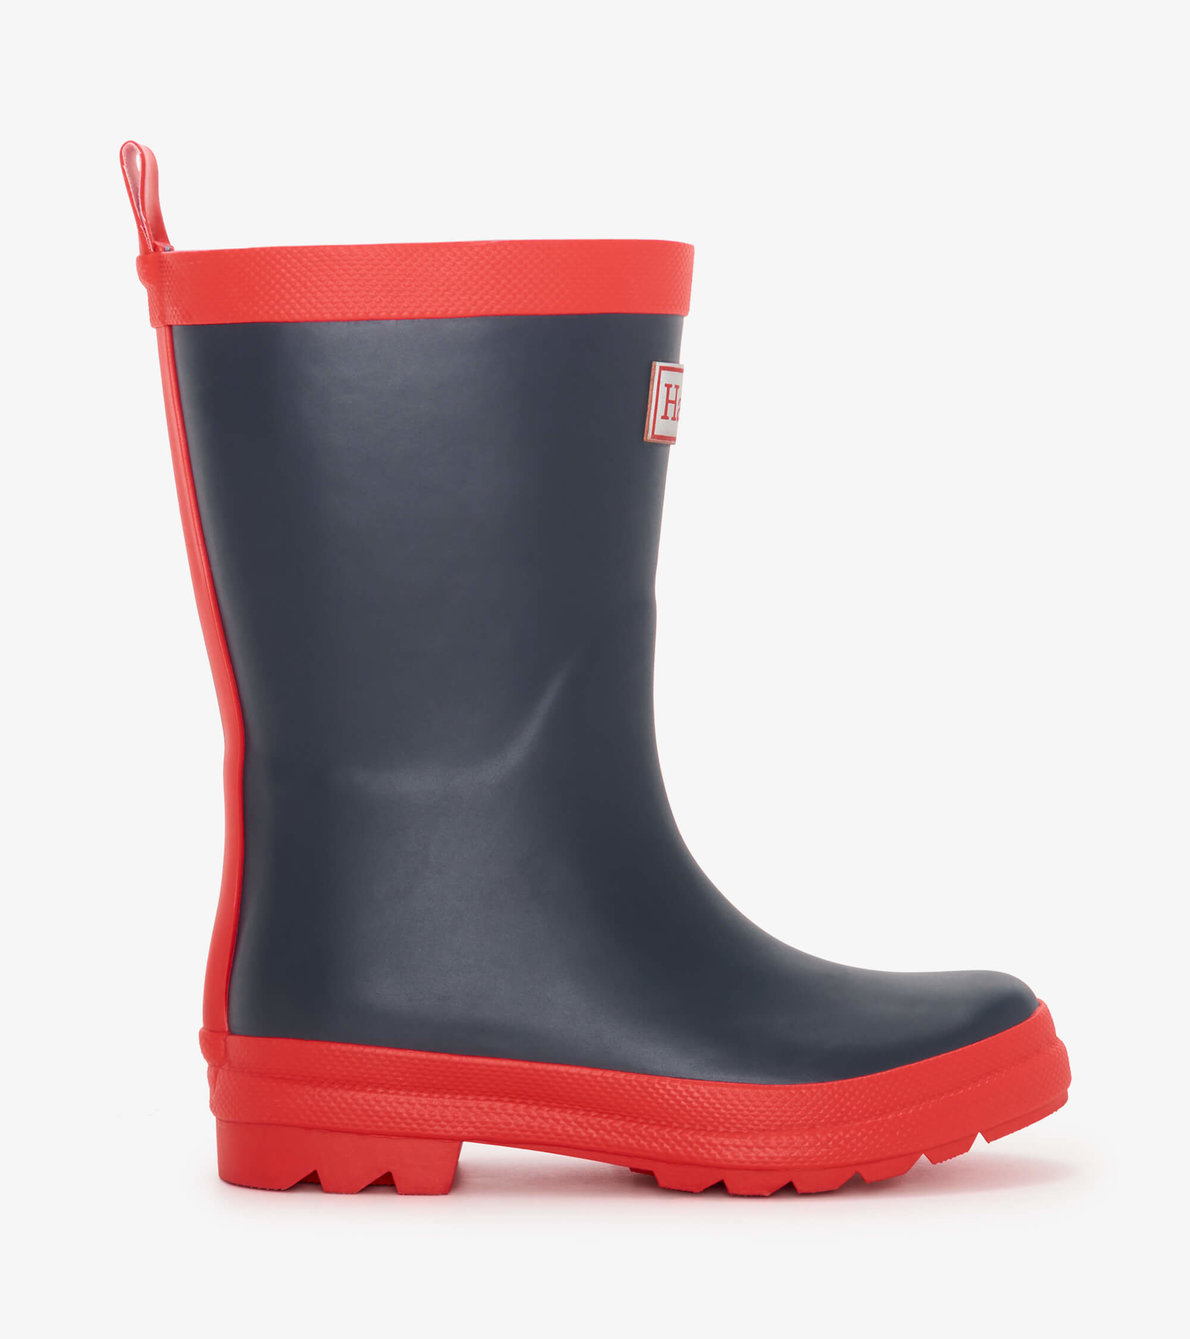 View larger image of Kids Navy & Red Matte Wellies